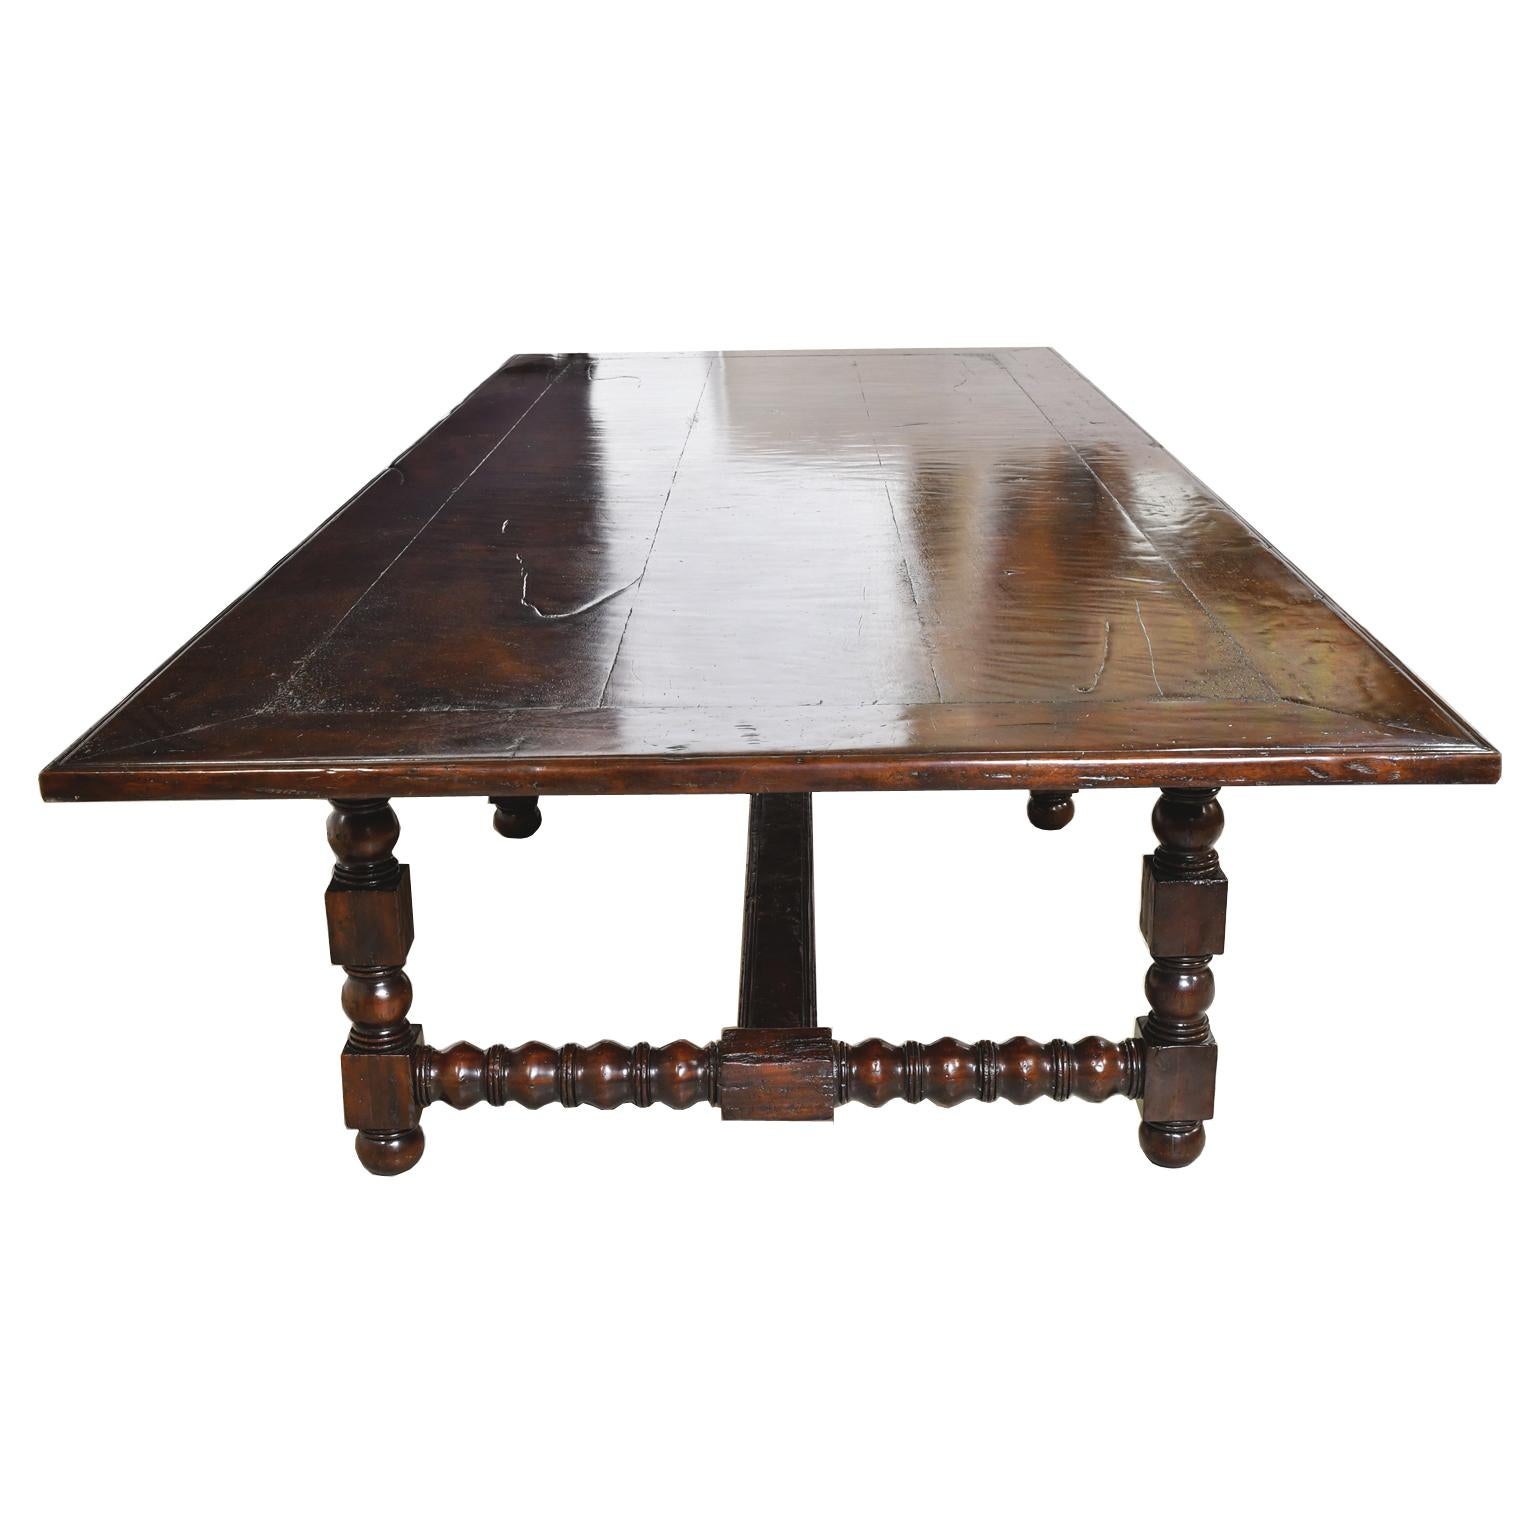 American Dining Set with 12' Long Mahogany Table & 10 Upholstered Chairs with Turned Legs